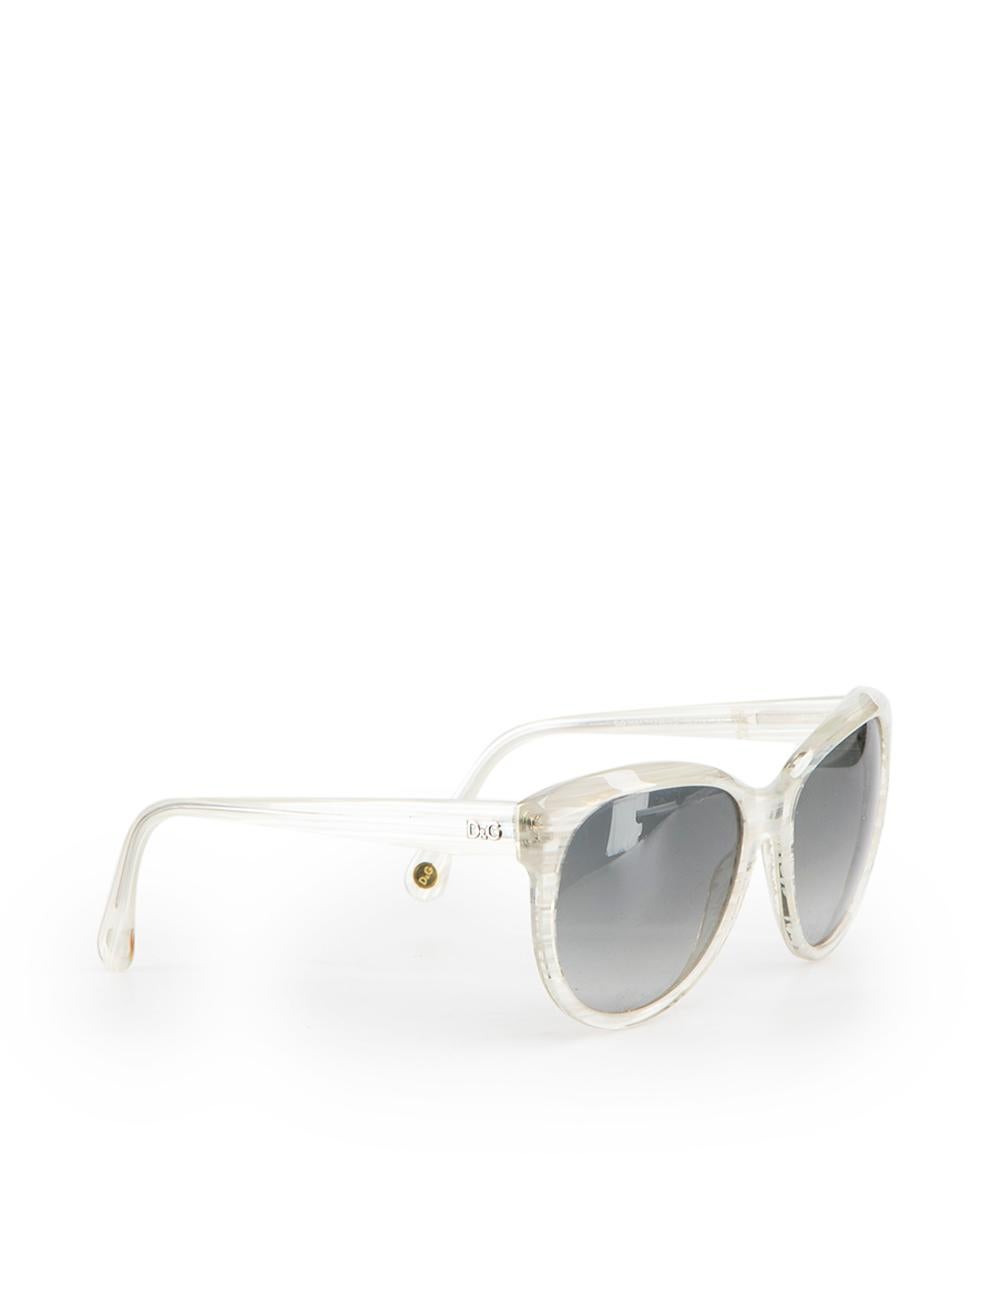 CONDITION is Very good. Minimal wear to sunglasses is evident. Minimal wear to both lenses with very light scratches on this used Dolce & Gabbana designer resale item.
 
 Details
 Silver
 Acetate
 Sunglasses
 Round
 Gradient grey lens
 
 
